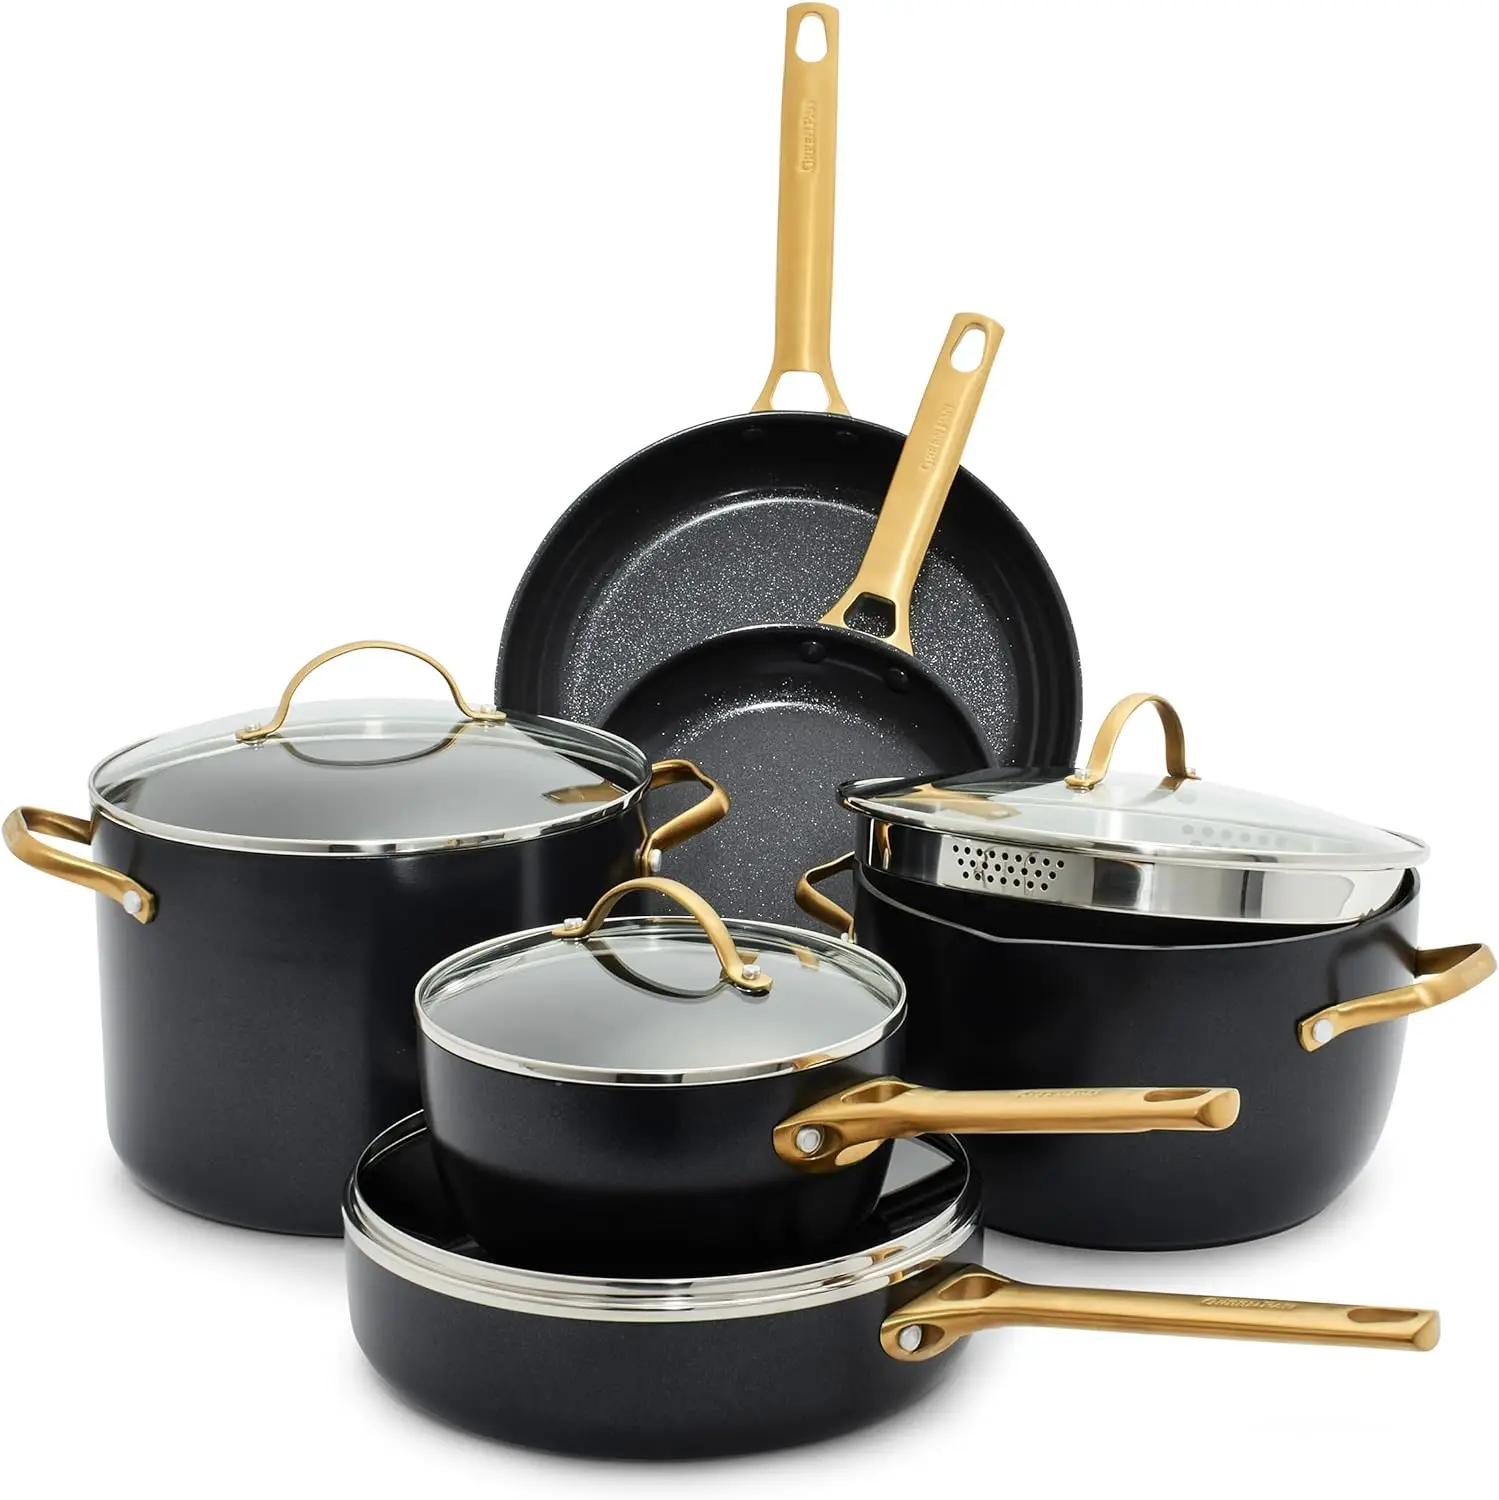 

GreenPan Reserve Hard Anodized Healthy Ceramic Nonstick 10 Piece Cookware Pots and Pans Set, Gold Handle